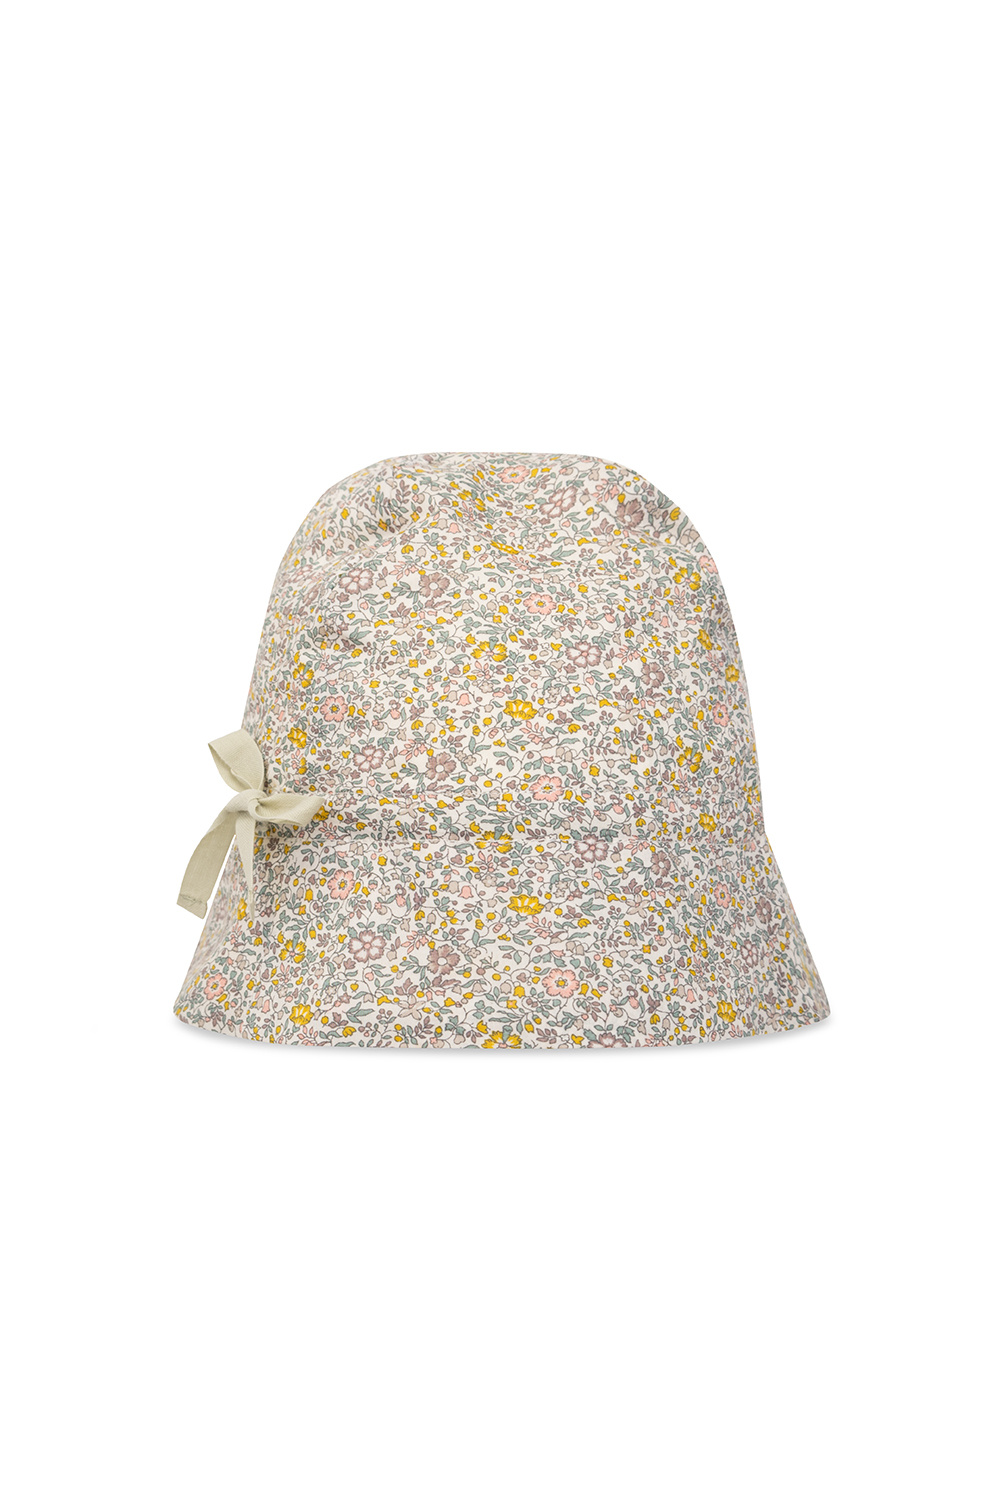 Bonpoint  Bucket hat with floral motif